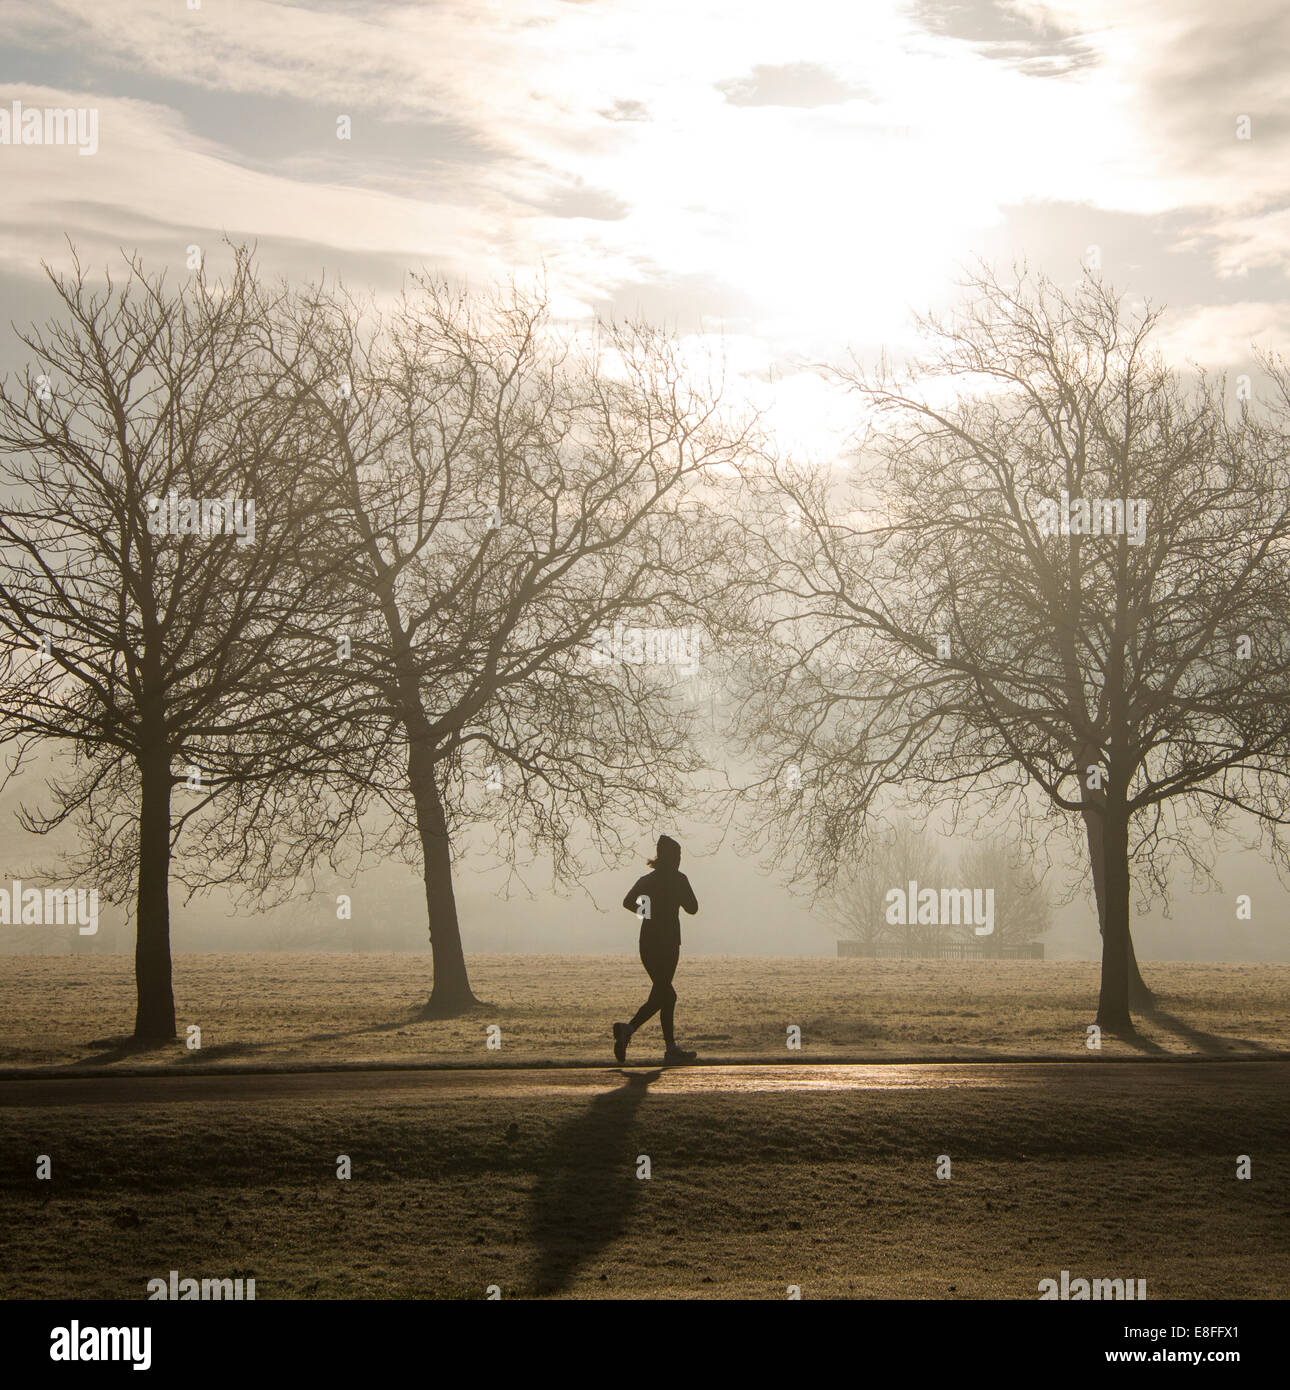 Silhouette of a woman Running through the park, England, United Kingdom Stock Photo